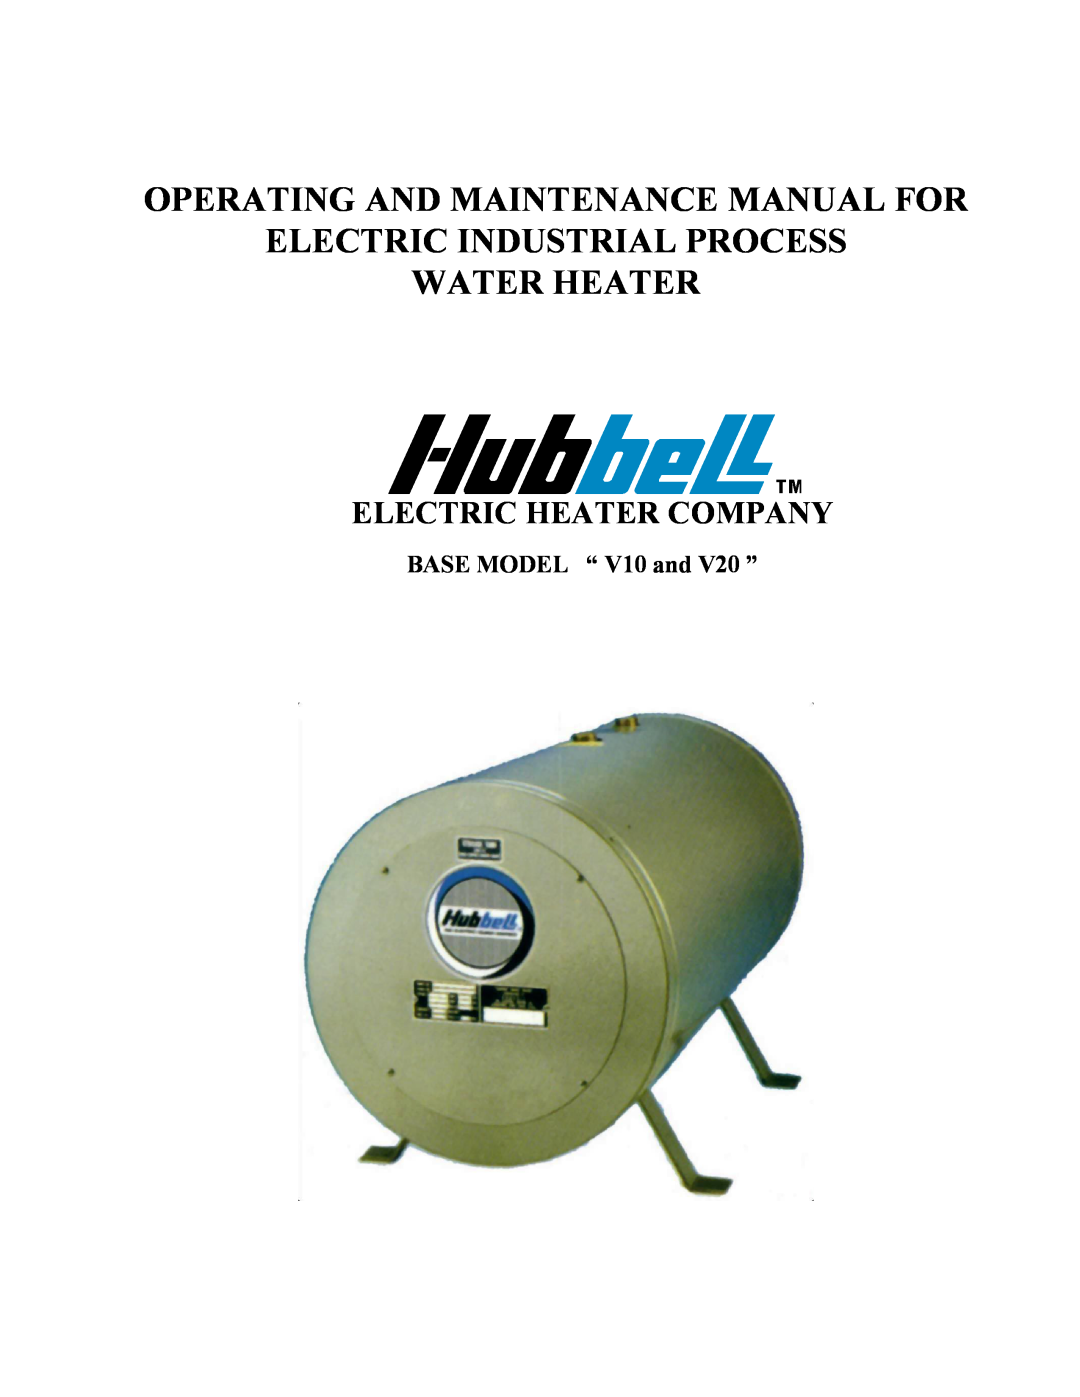 Hubbell Electric Heater Company manual BASE MODEL “ V10 and V20 ”, Operating And Maintenance Manual For 